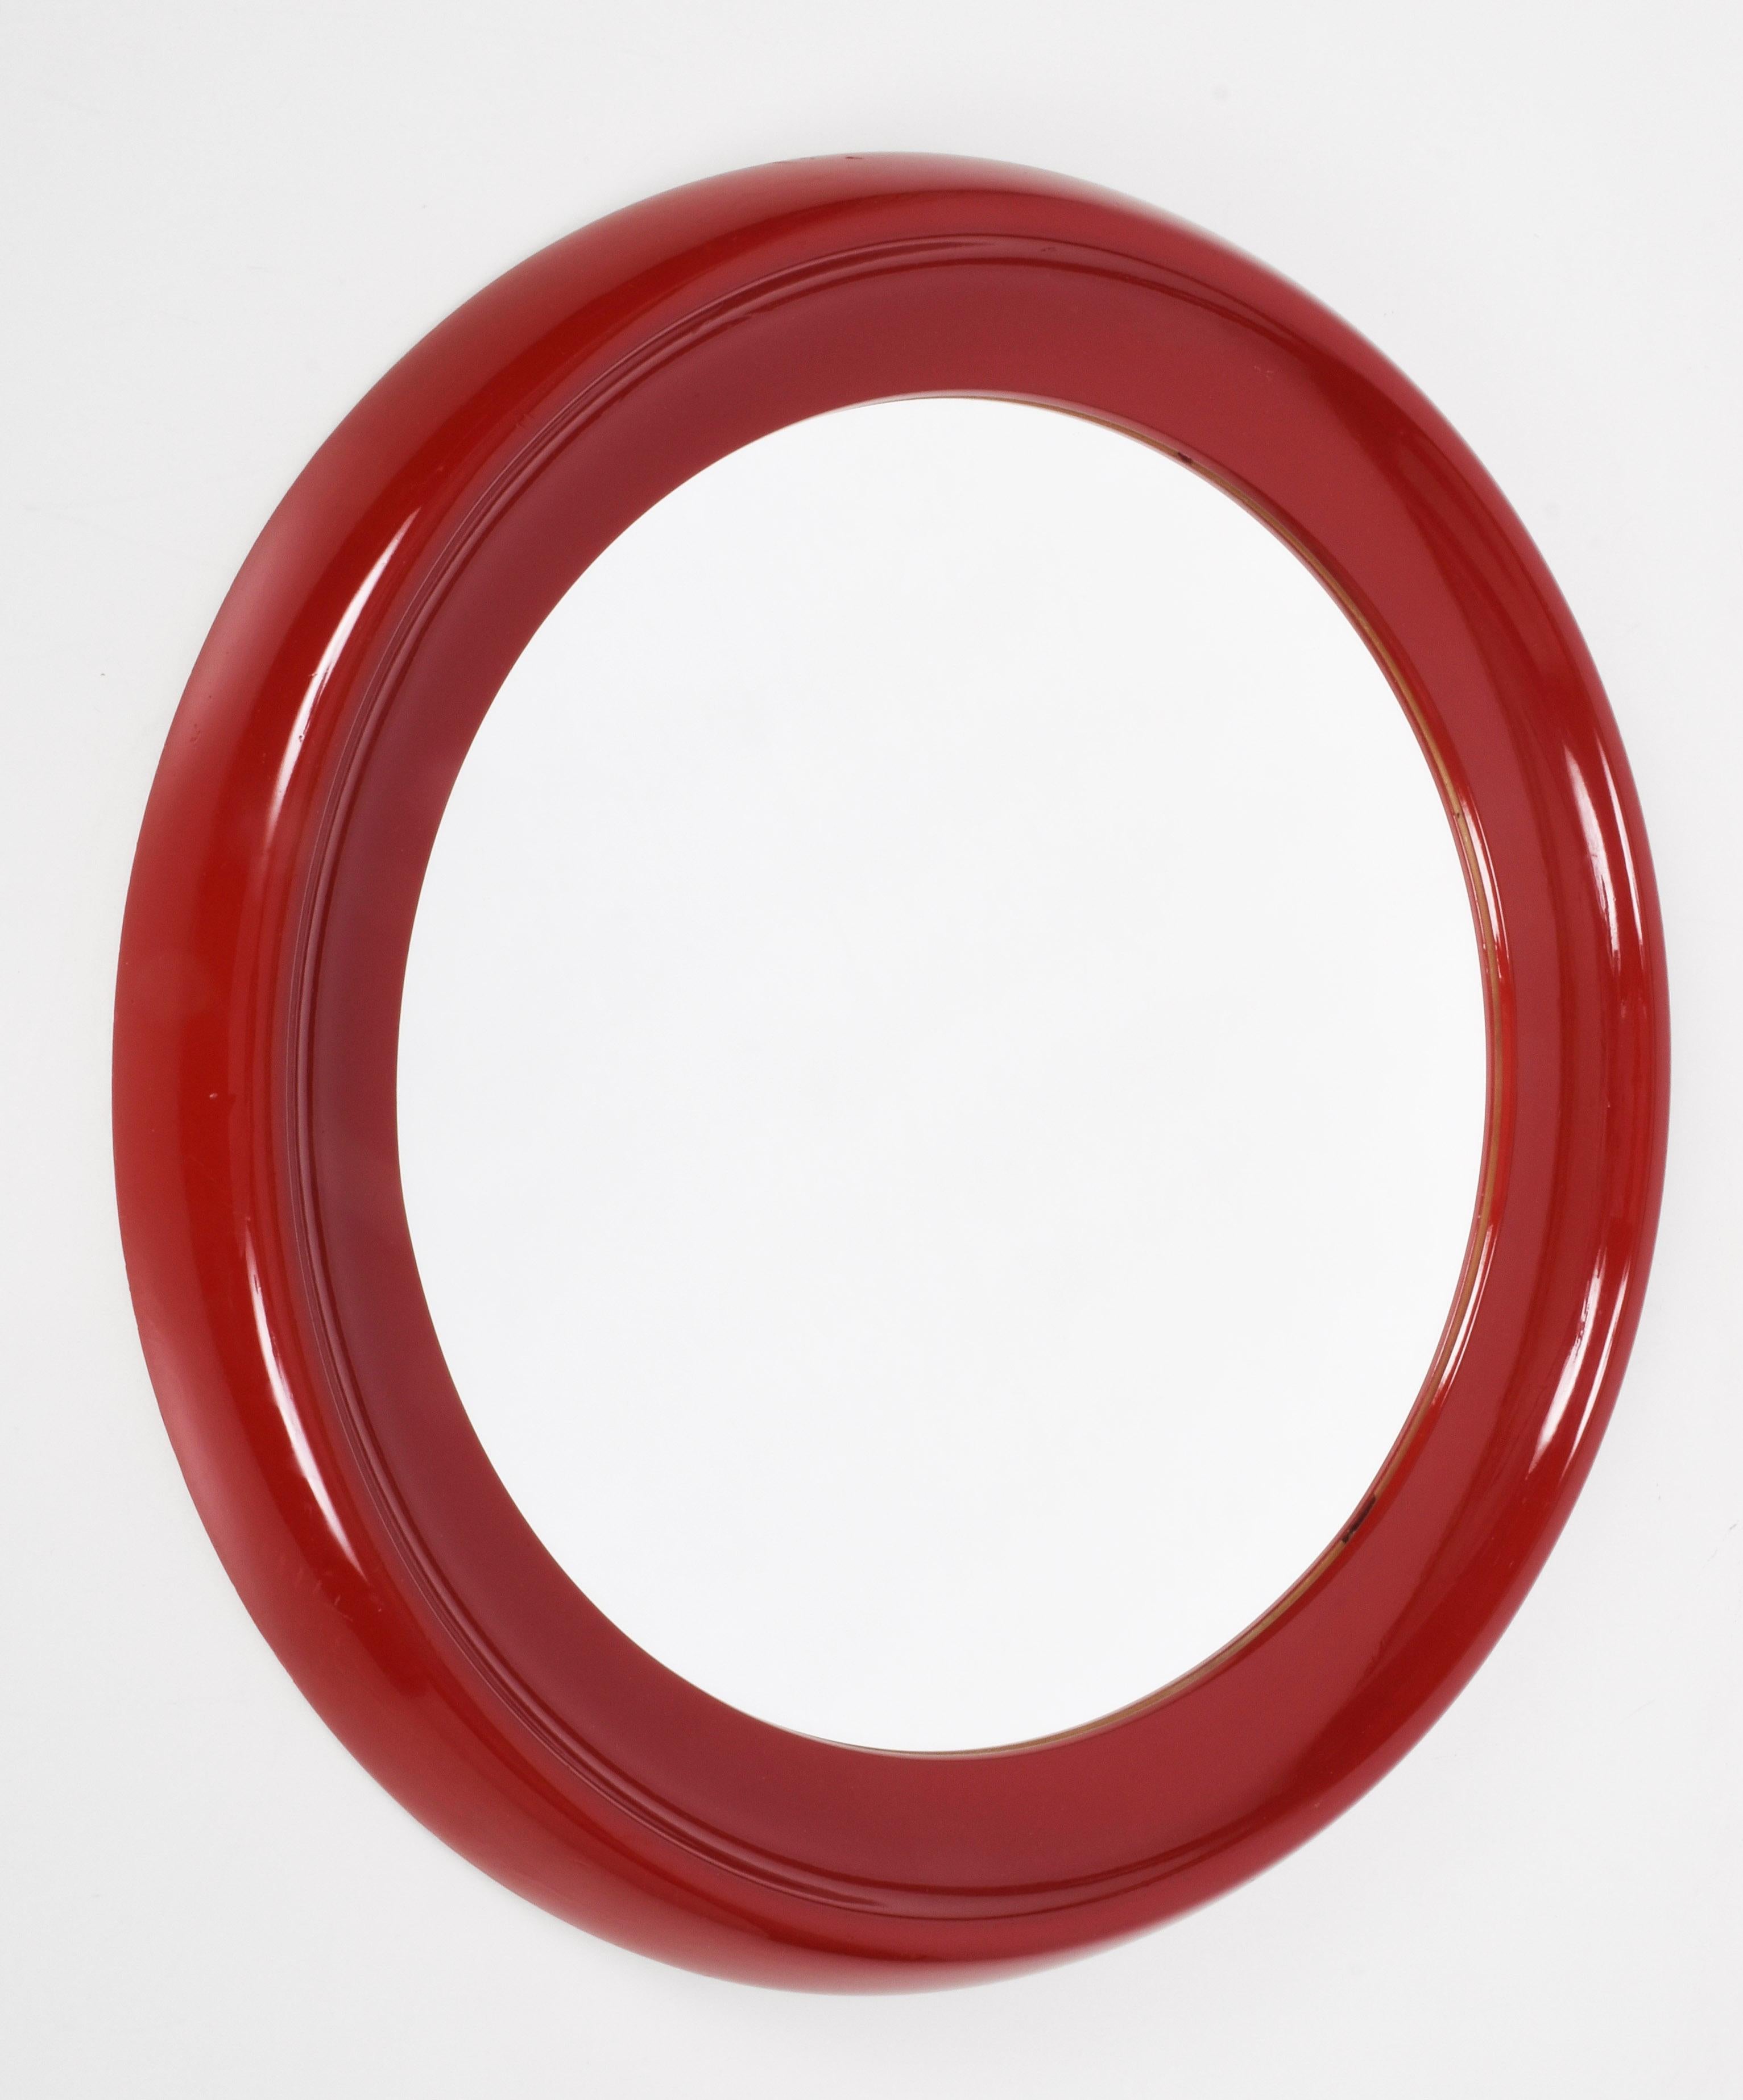 Late 20th Century Midcentury Round Italian Mirror with Red Lacquered Resin Frame, 1970s